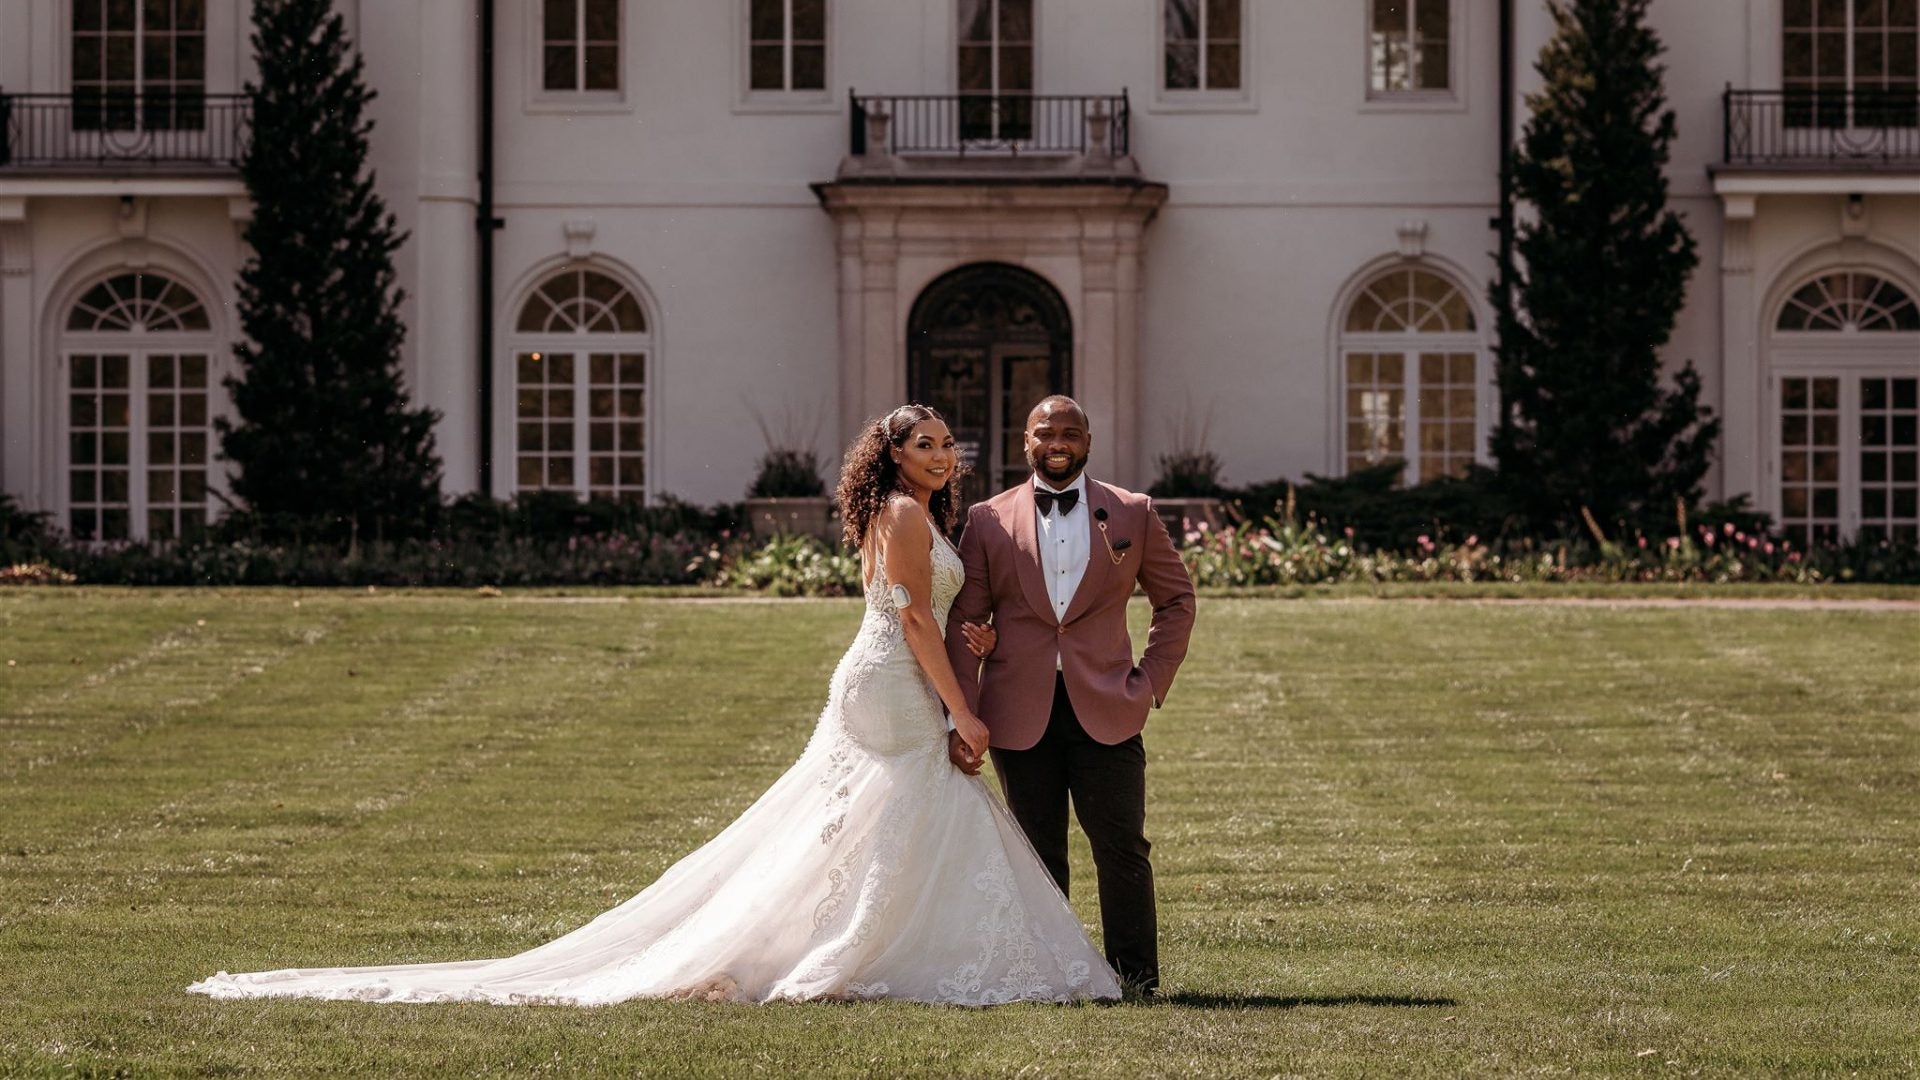 Bridal Bliss: Iman And Anthony's Wedding Was Filled With Lush Greenery And Lots Of Love